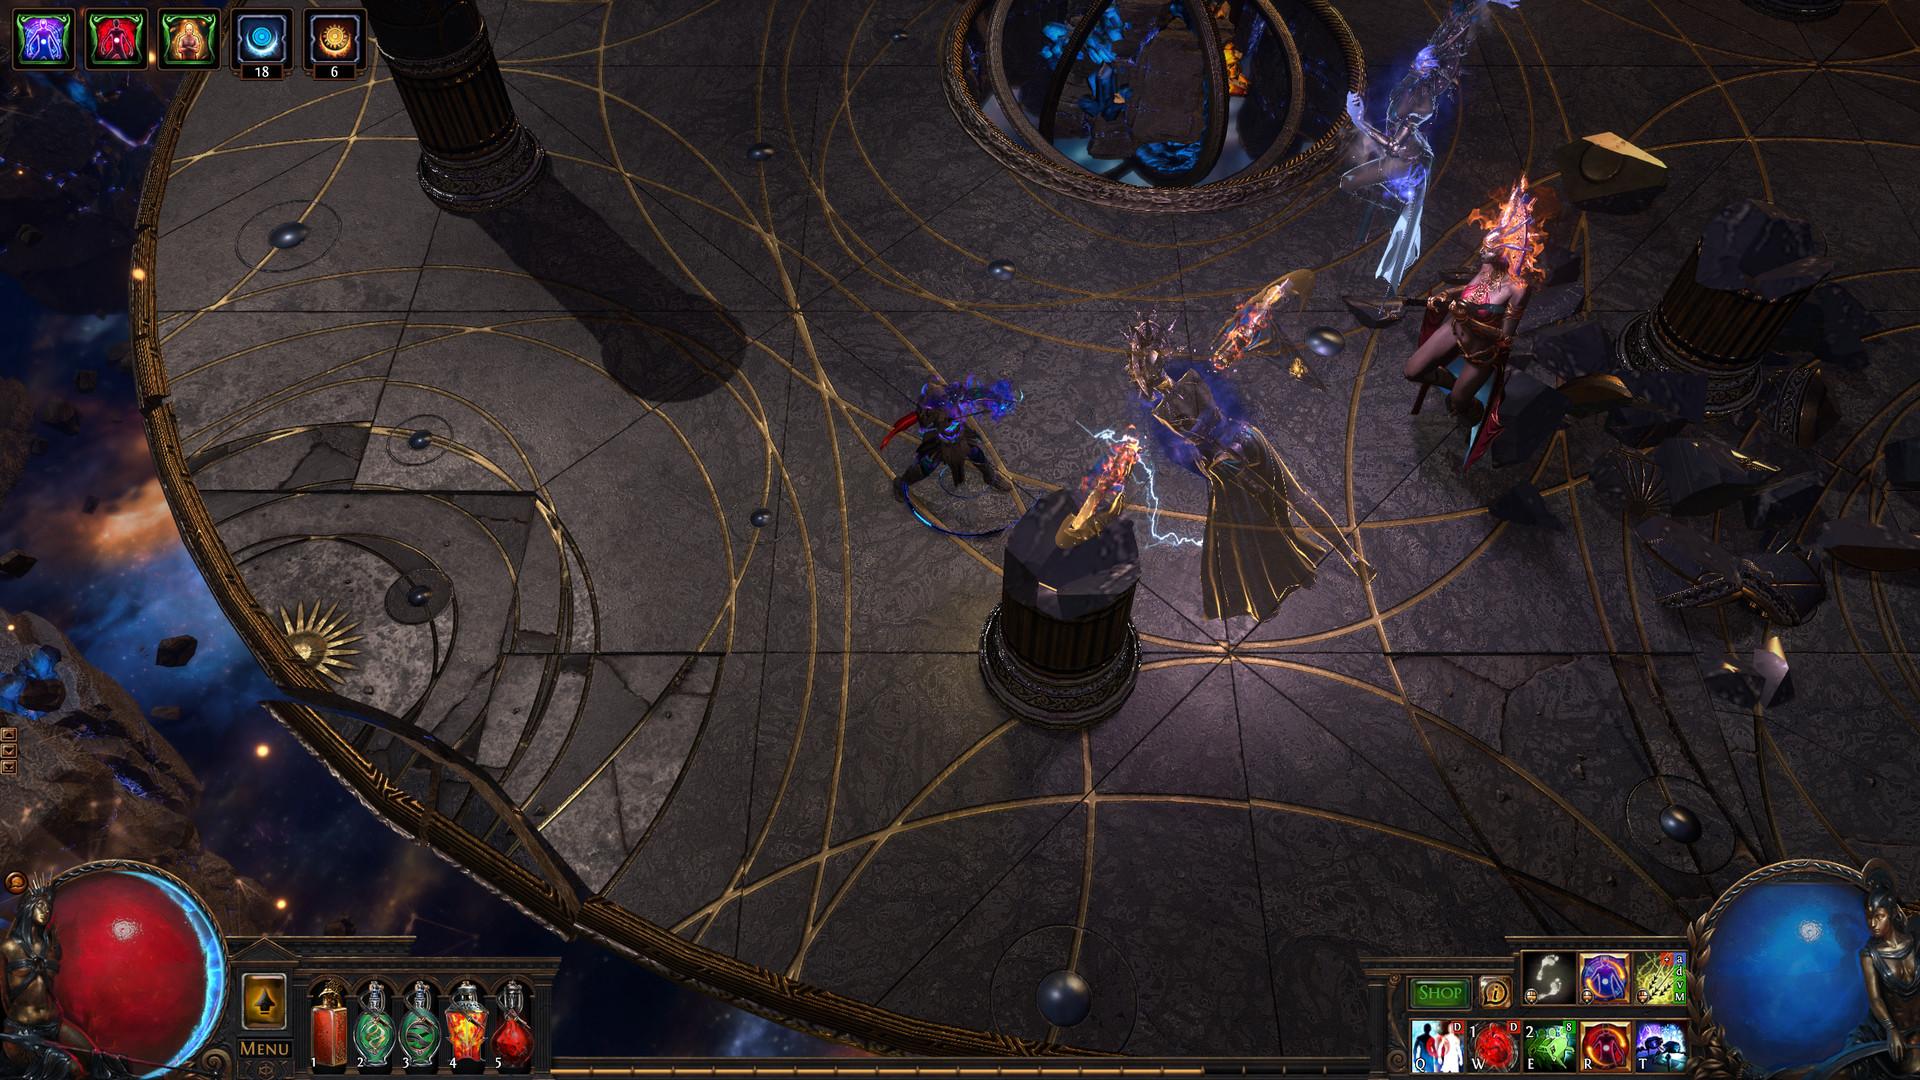 Screenshot №7 from game Path of Exile